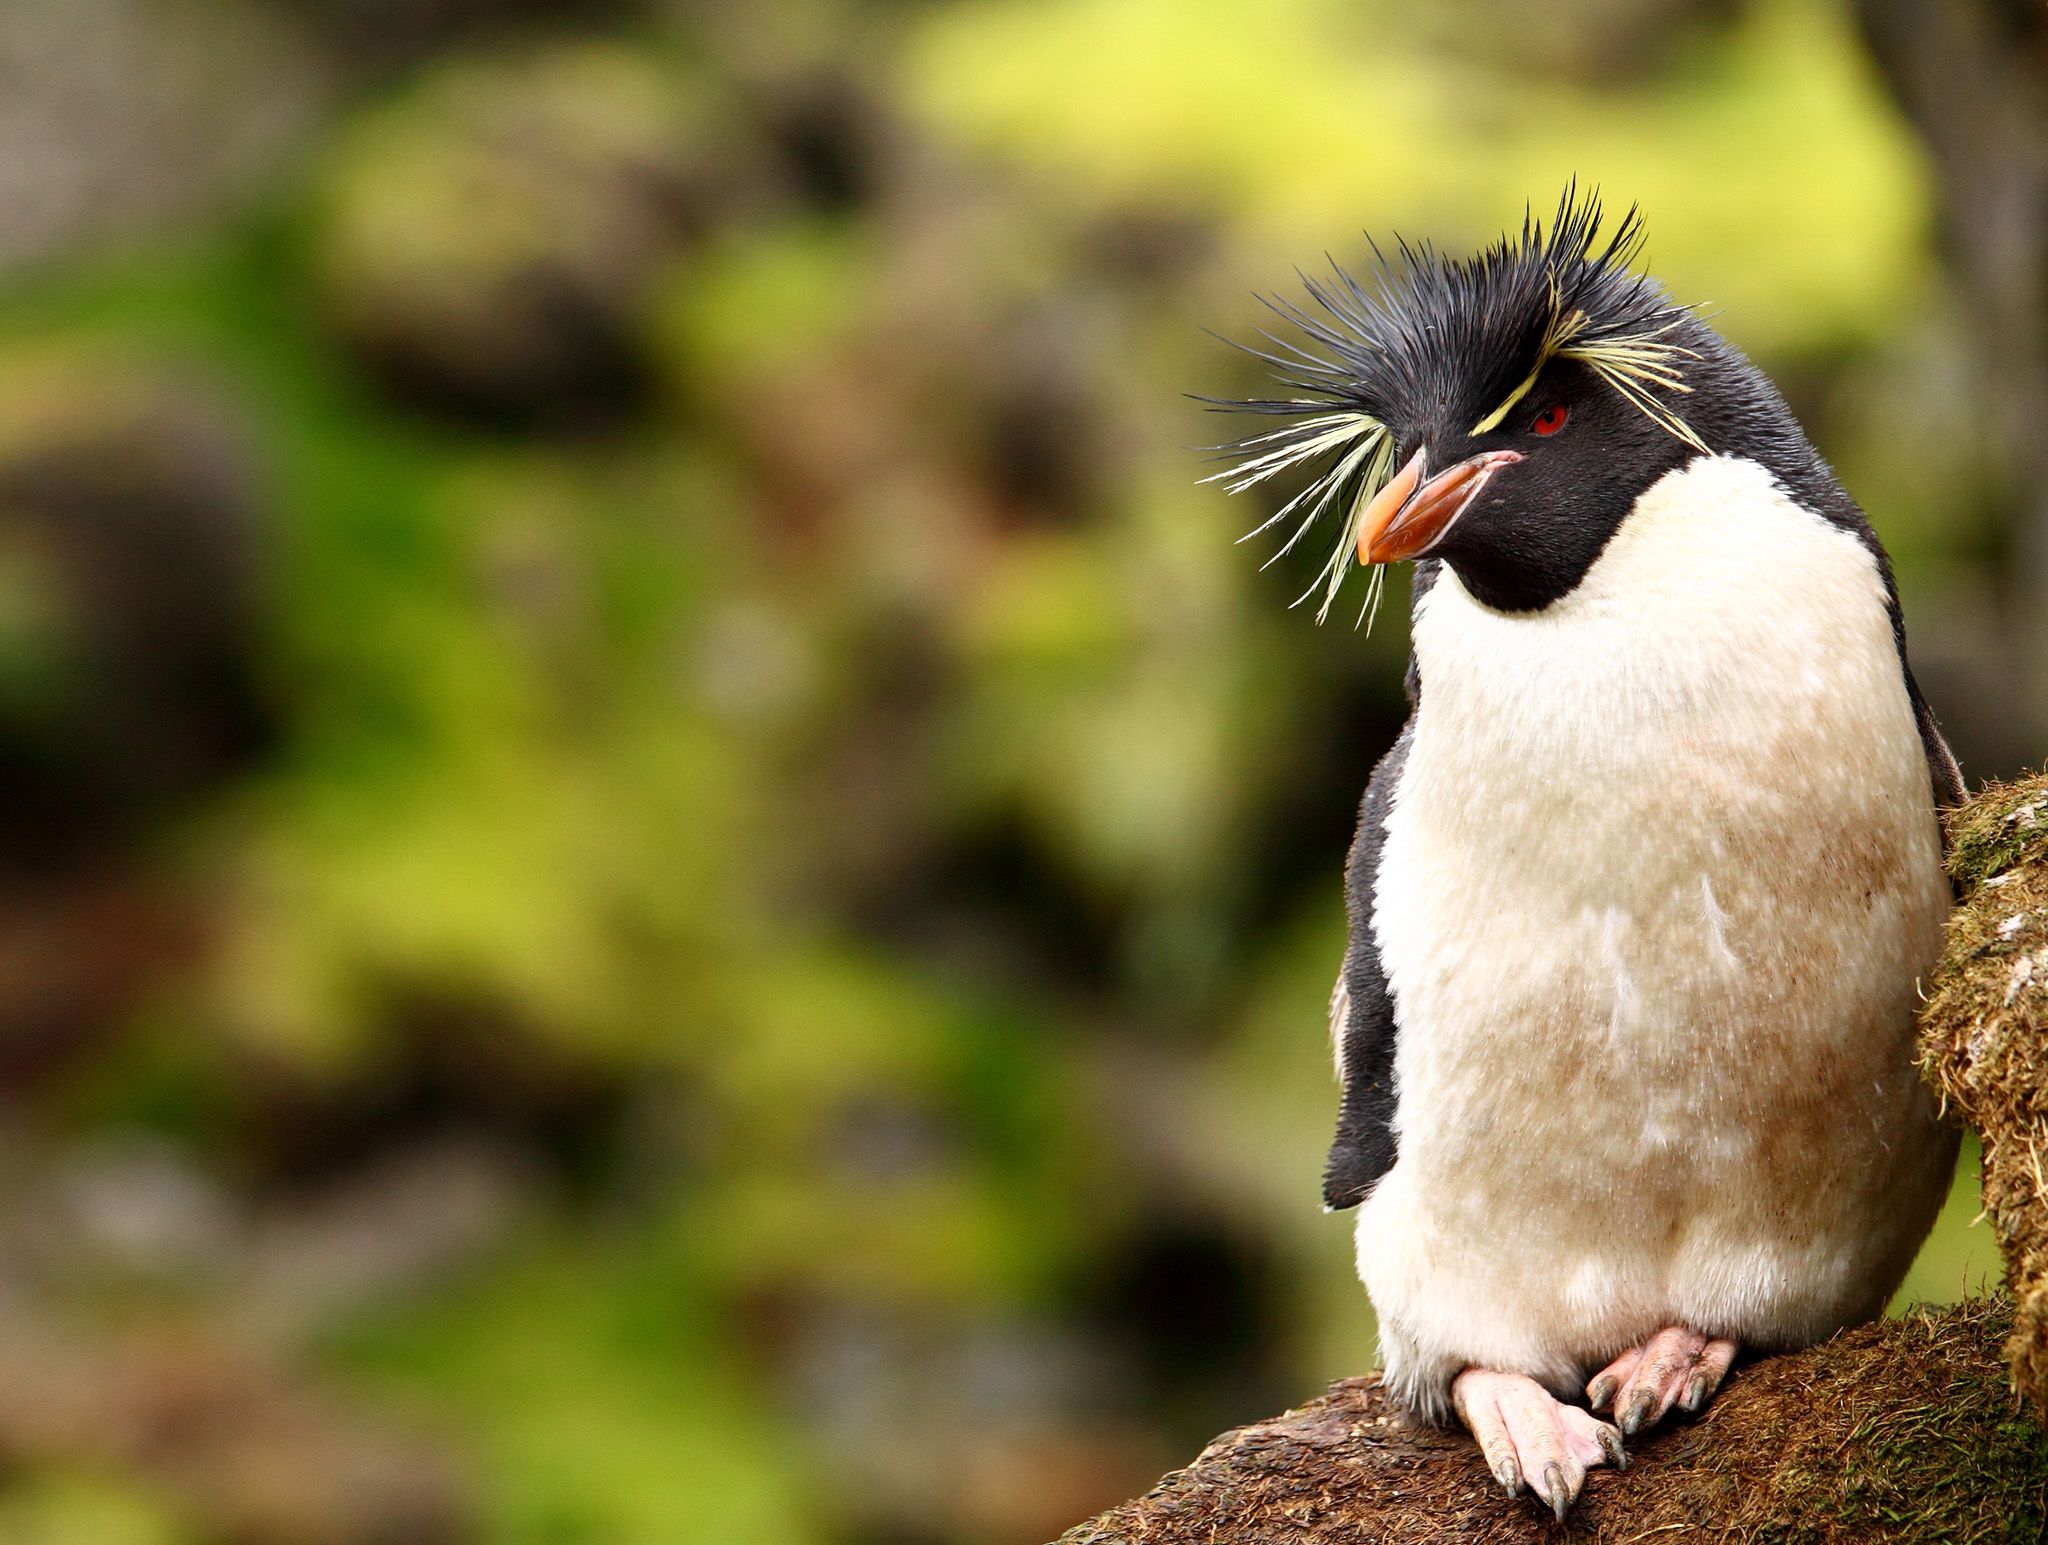 Macquarie Island, Sub Antarctica:  Rock Hopper Penguin standing on a rock.  This image is from... [Photo of the day - February 2020]